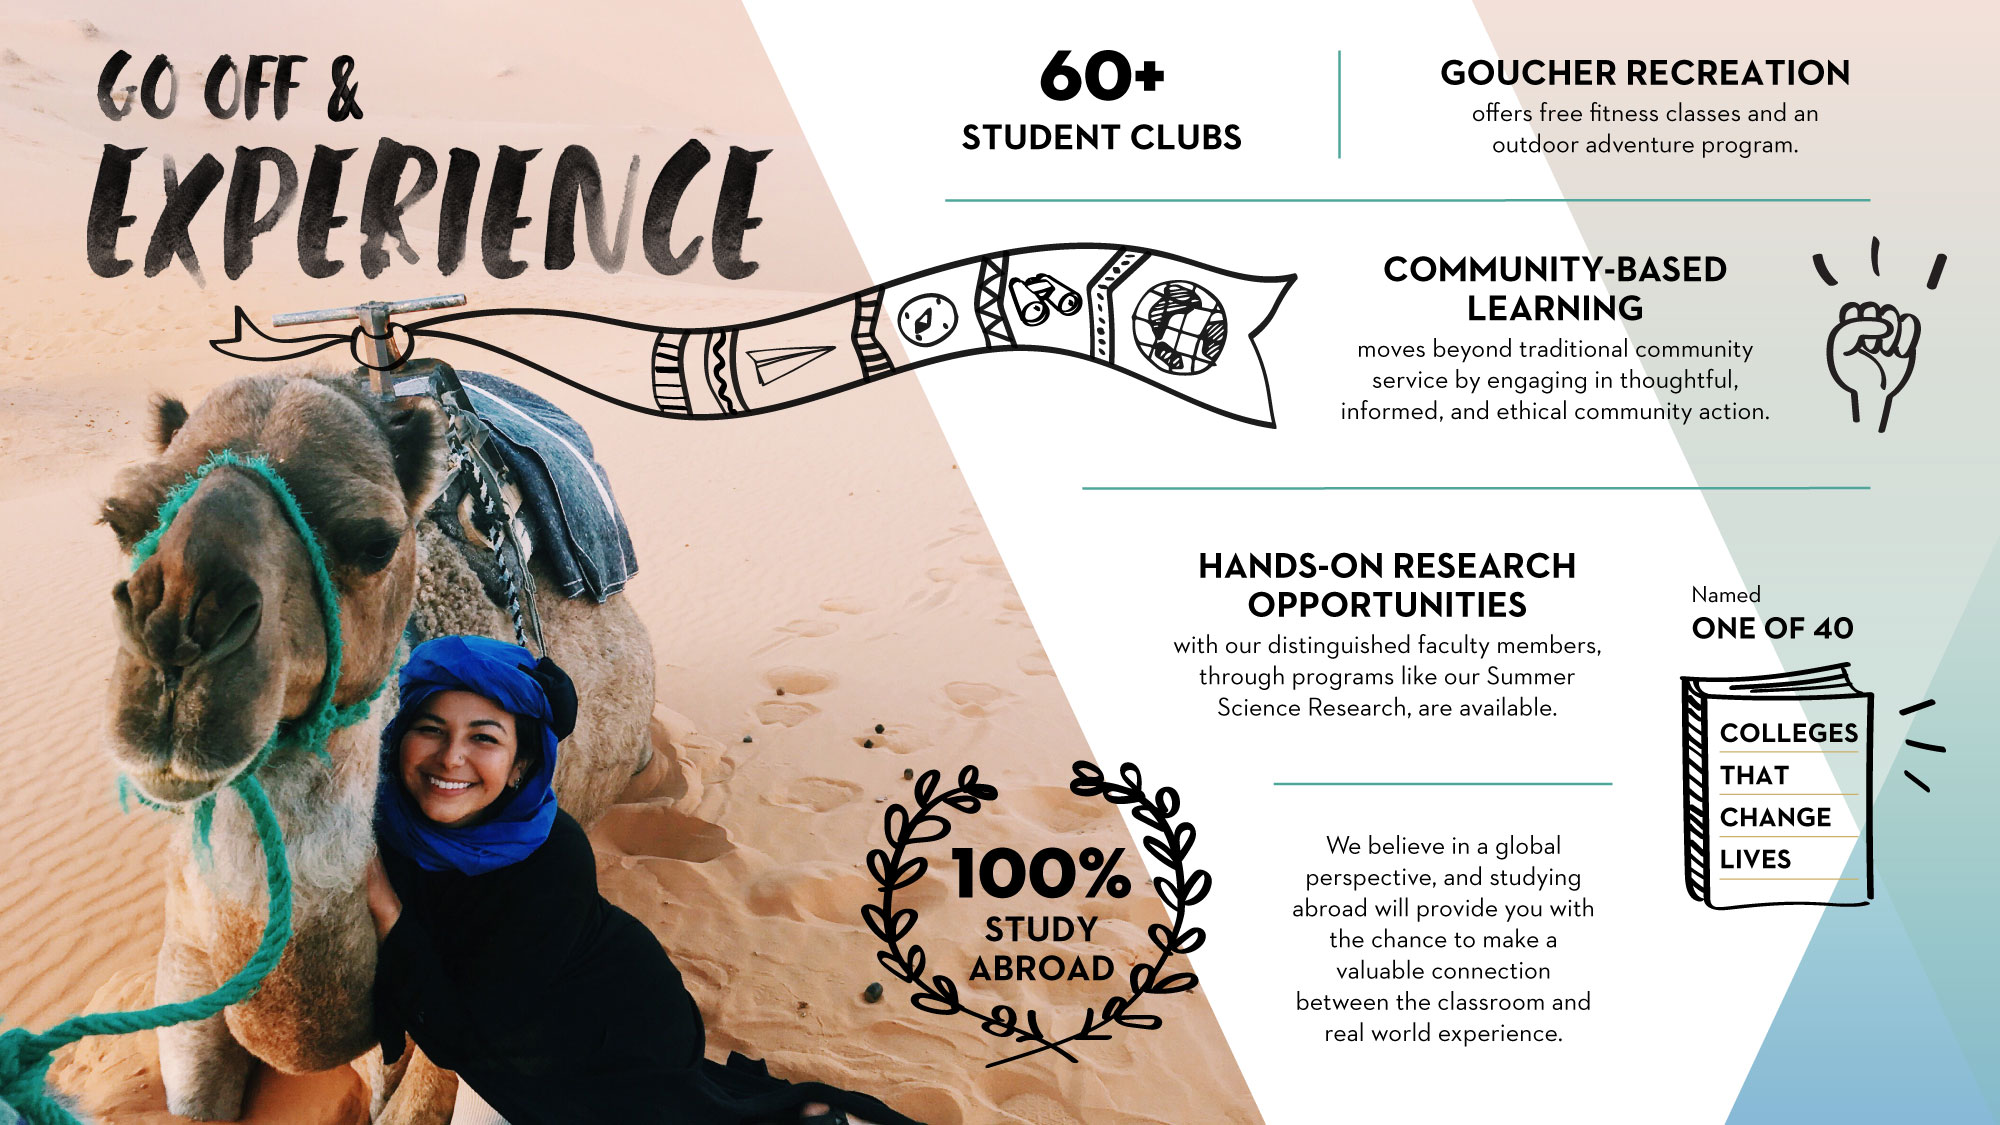 Go off and exeprience we believe in a global perspective and studying abroad will provide you with the chance to make a valuable connection between the classroom and real world experience